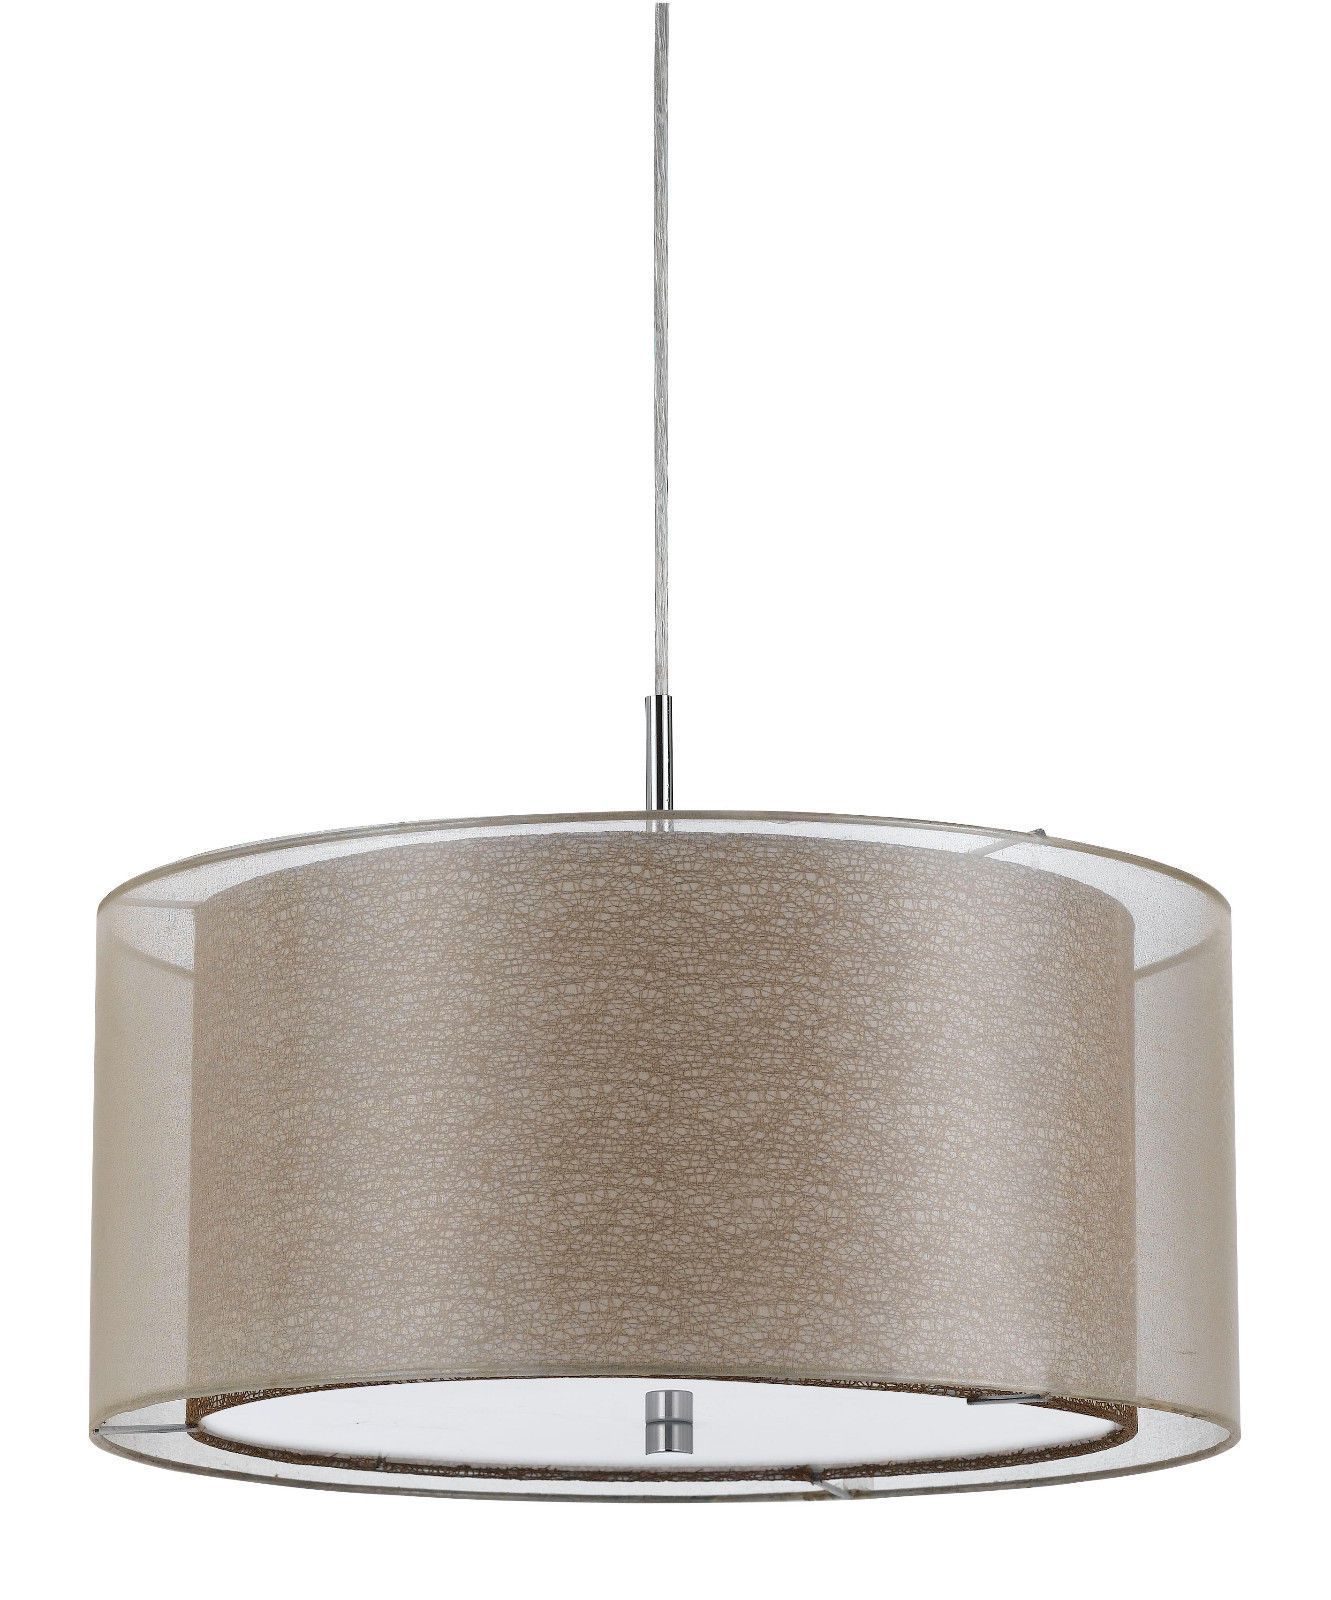 Pin On Drum Pendant Lights Intended For Burton 5 Light Drum Chandeliers (View 25 of 30)